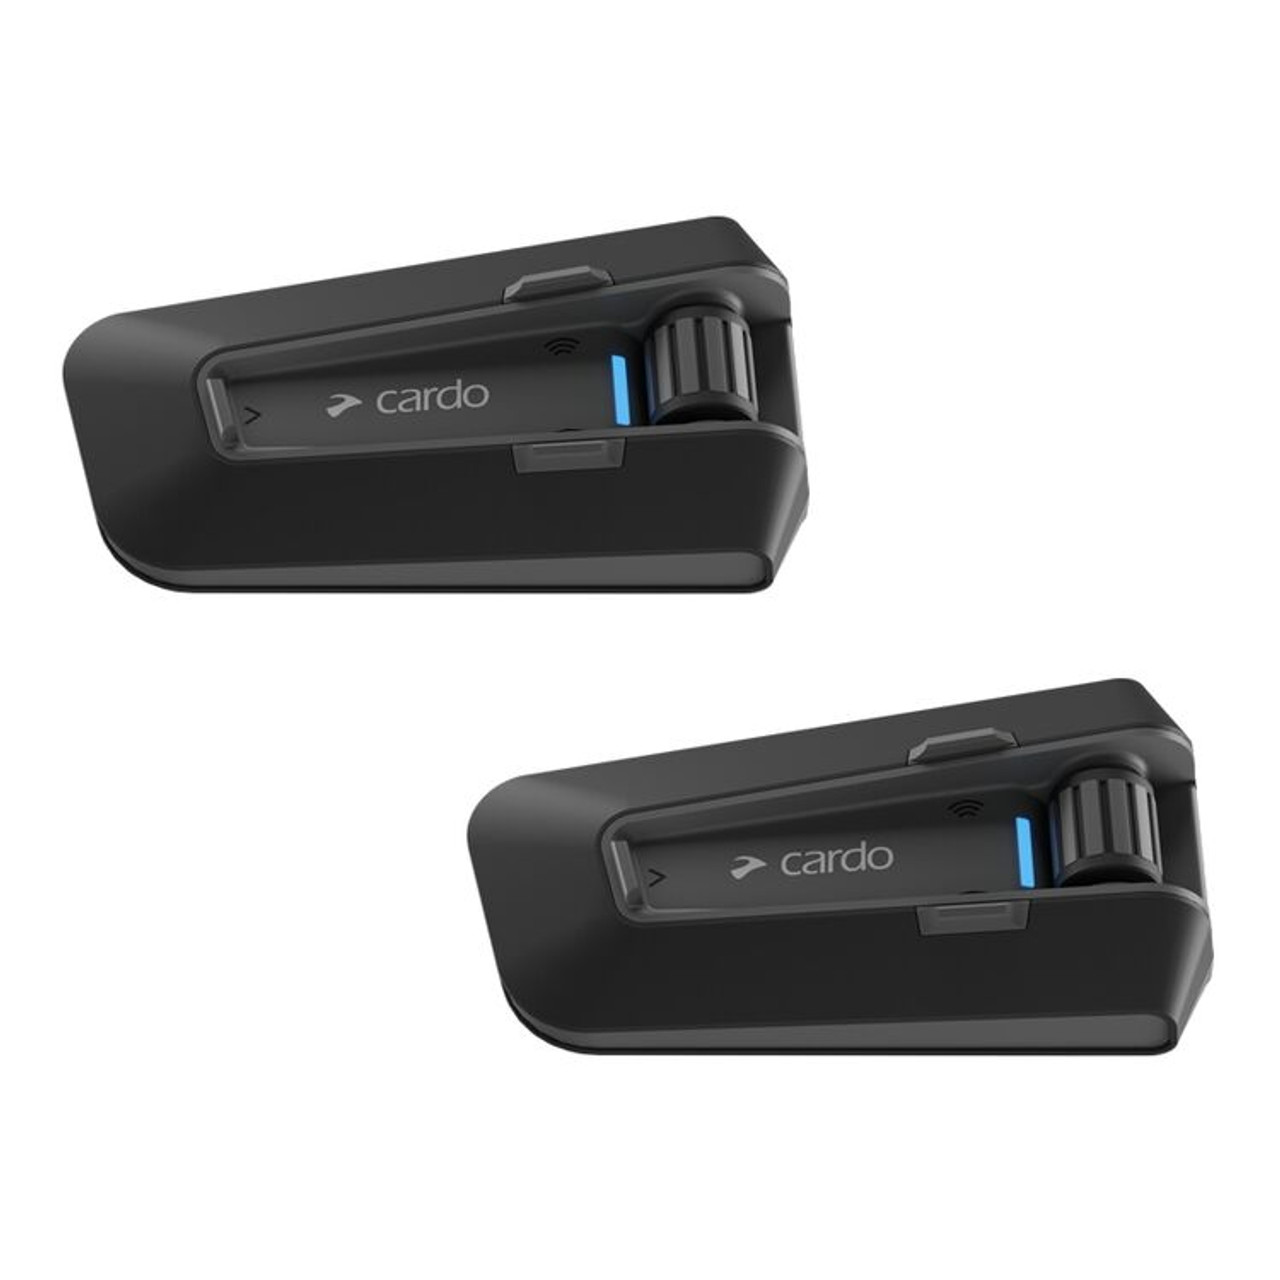 https://cdn11.bigcommerce.com/s-0m9ut/images/stencil/1280x1280/products/314616/374110/cardo_pack_talk_neo_headset_duo_pack__09641.1673994545.jpg?c=2